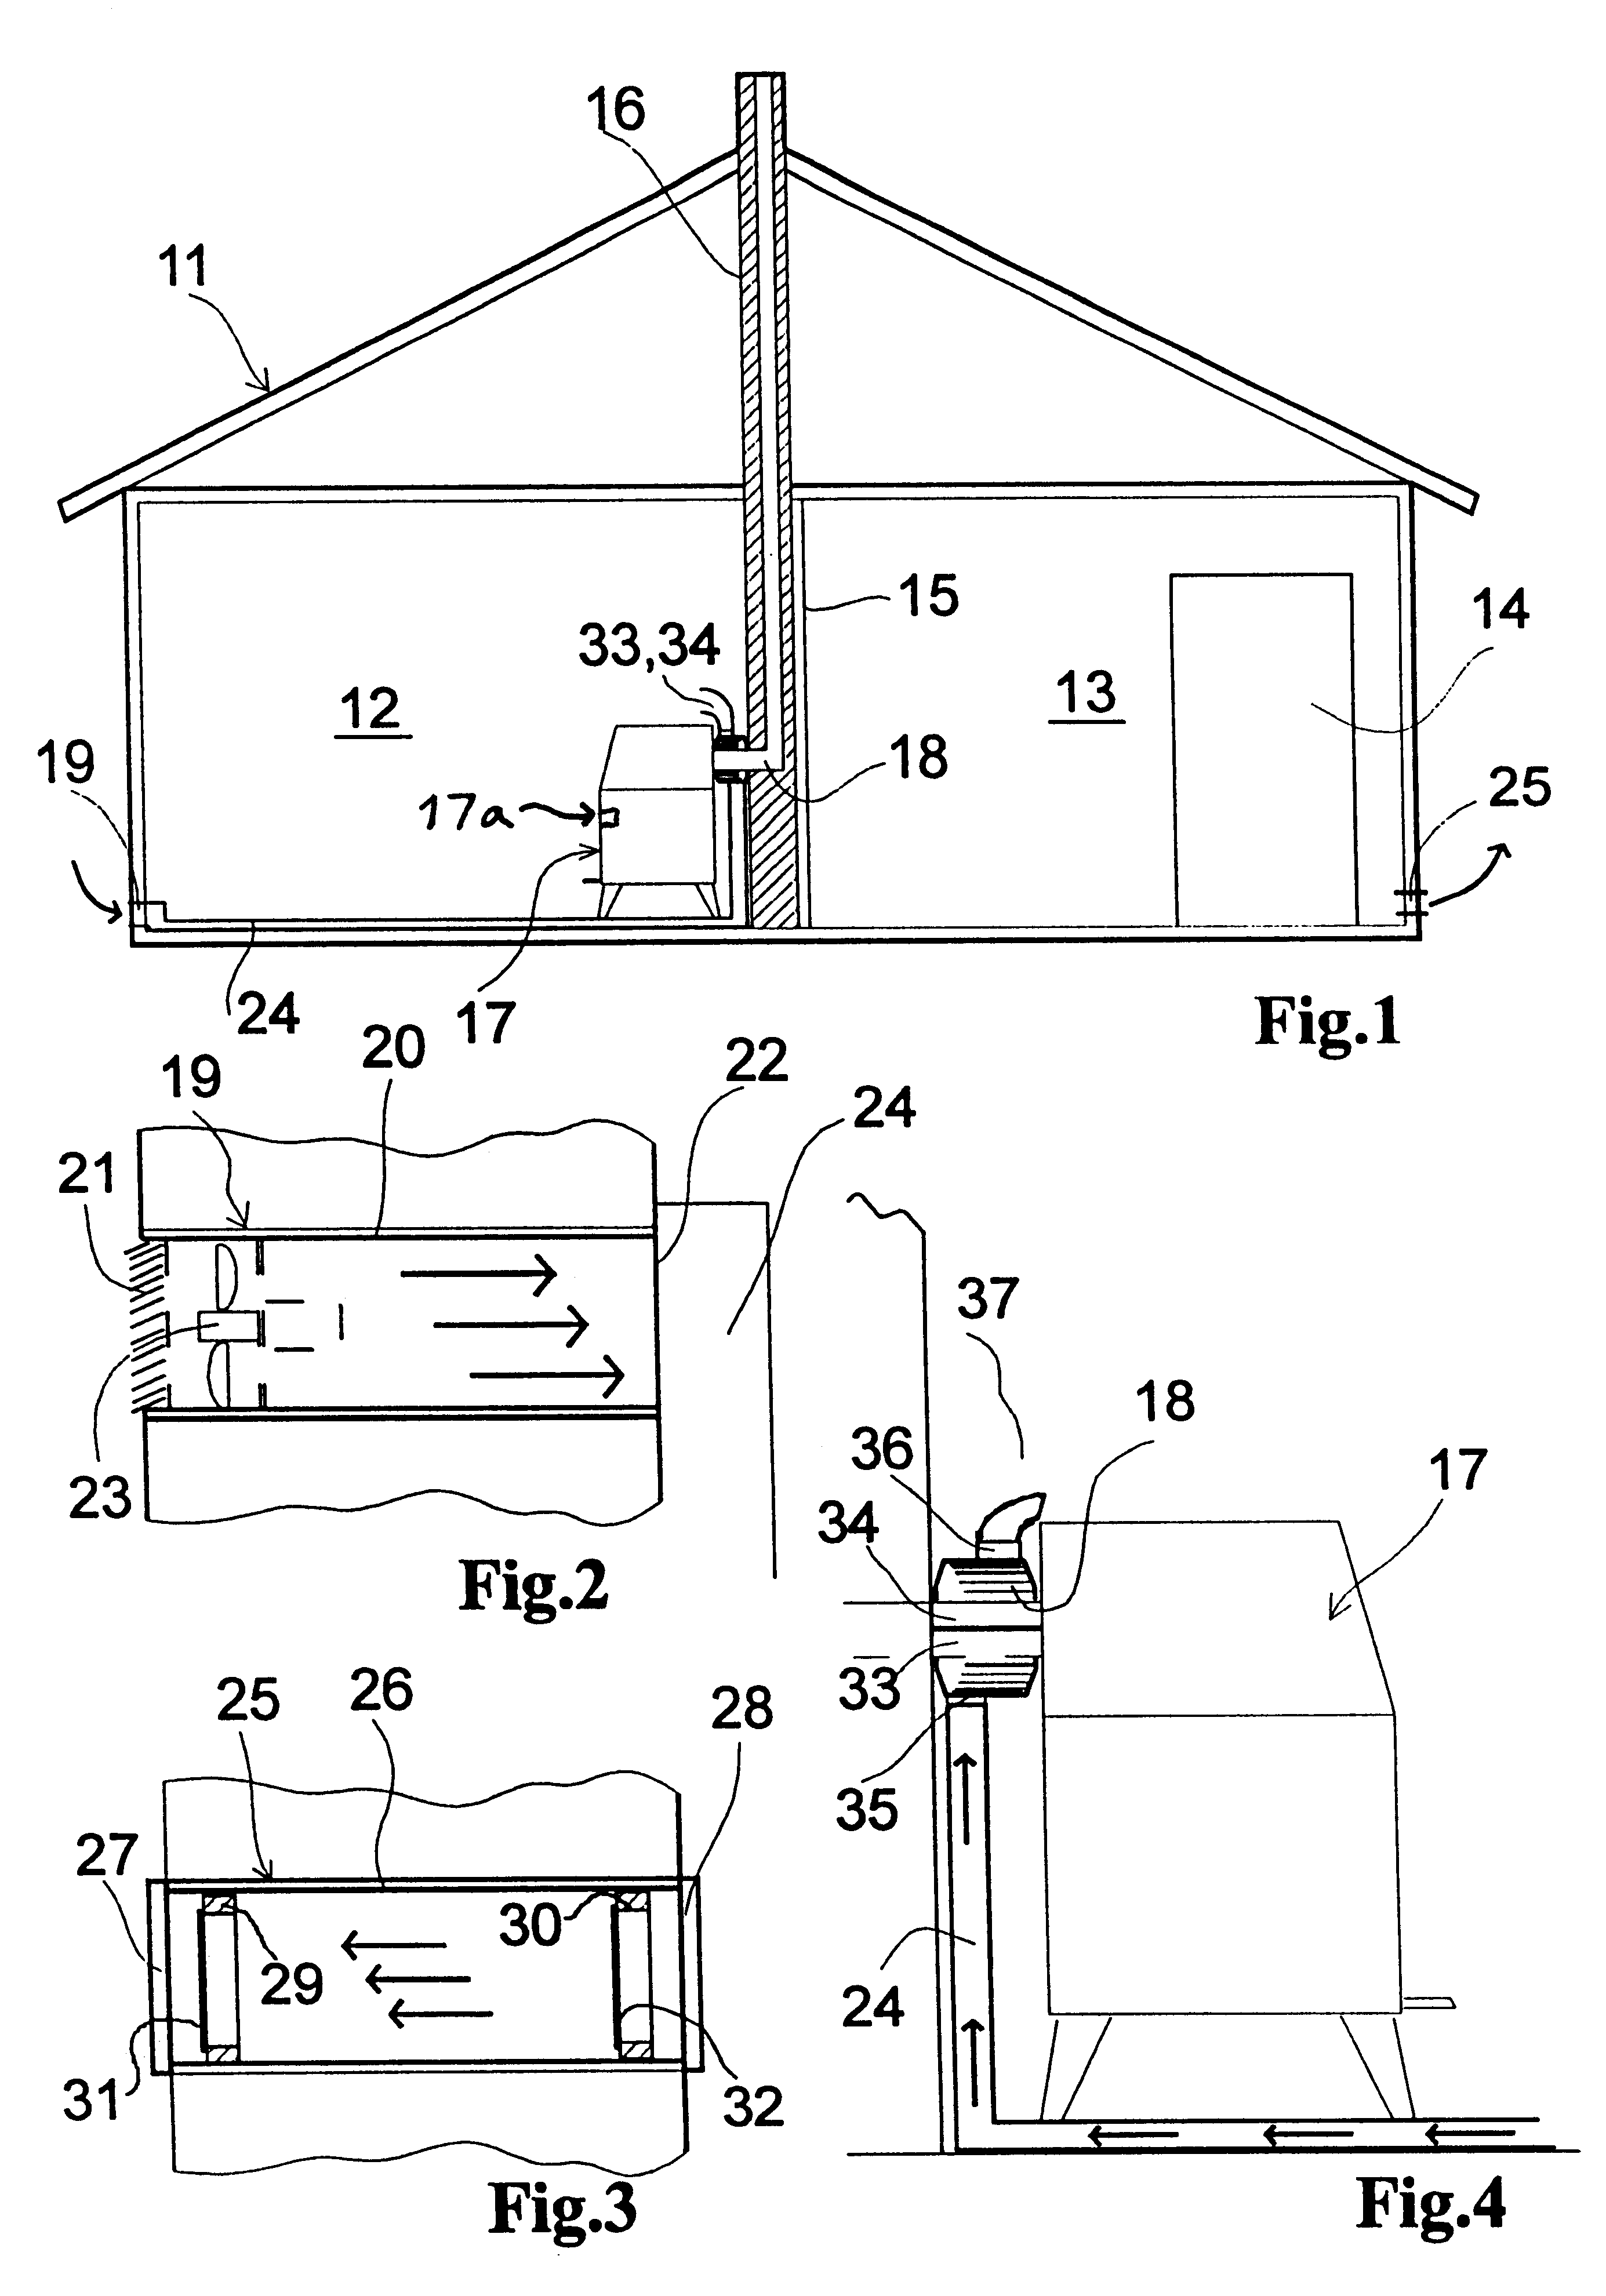 Method for operating a stove in a building, and a device for carrying out this method